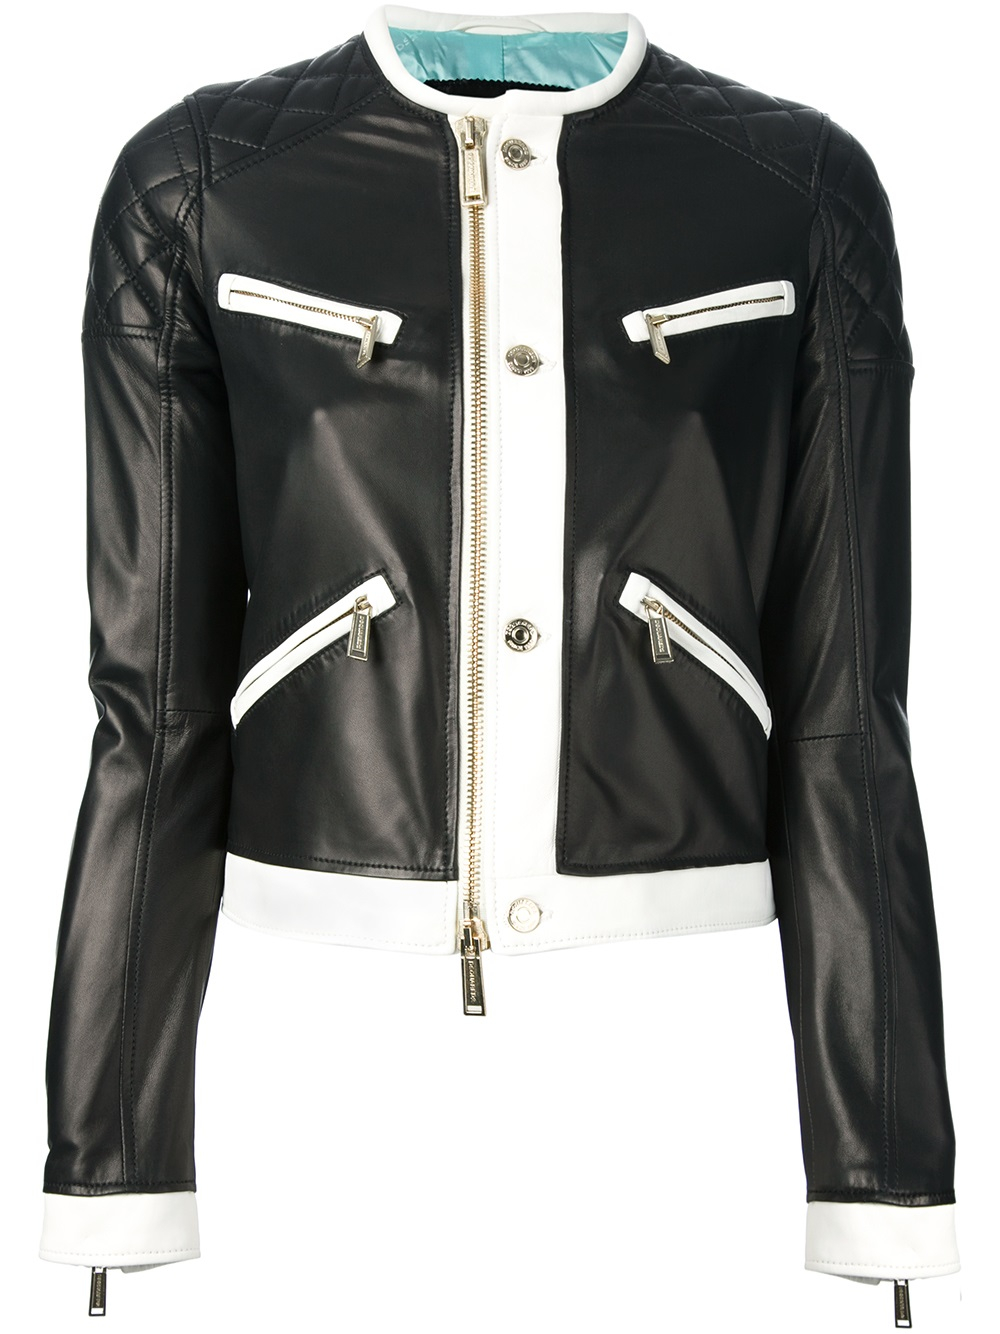 Lyst - Dsquared² Leather Jacket in Black